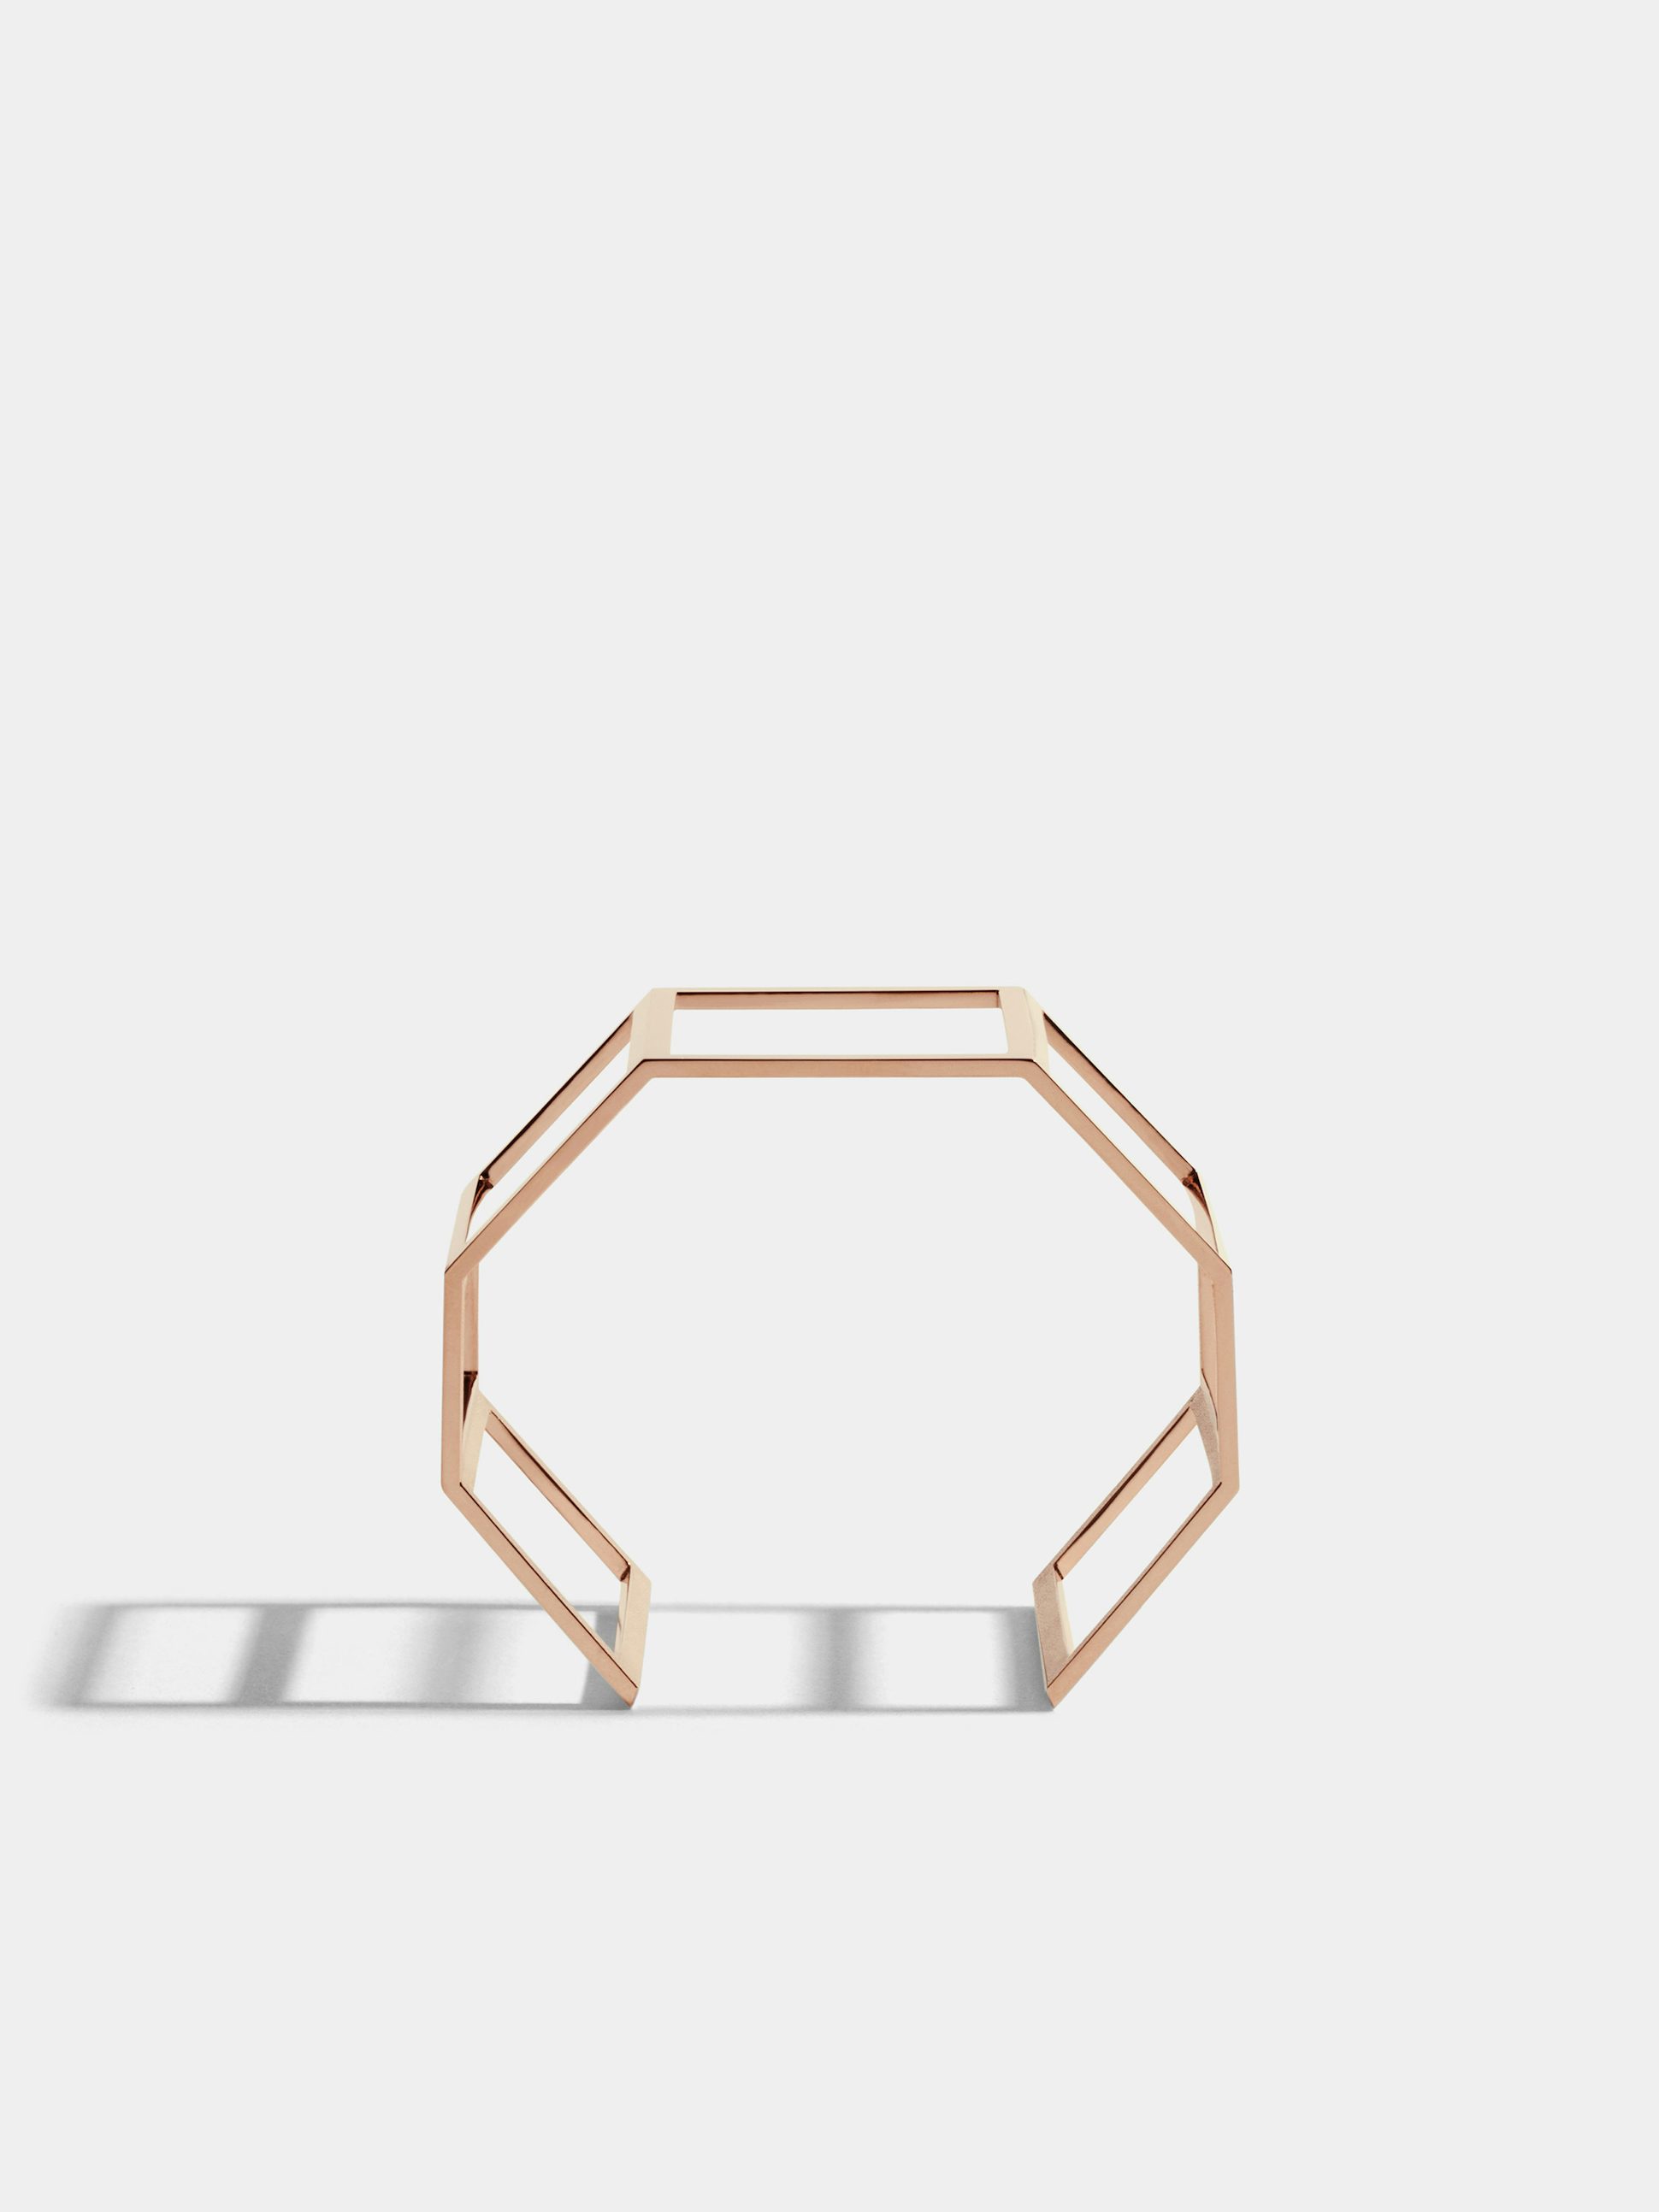 Octogone cuff in 18k Fairmined ethical rose gold (40mm wide)